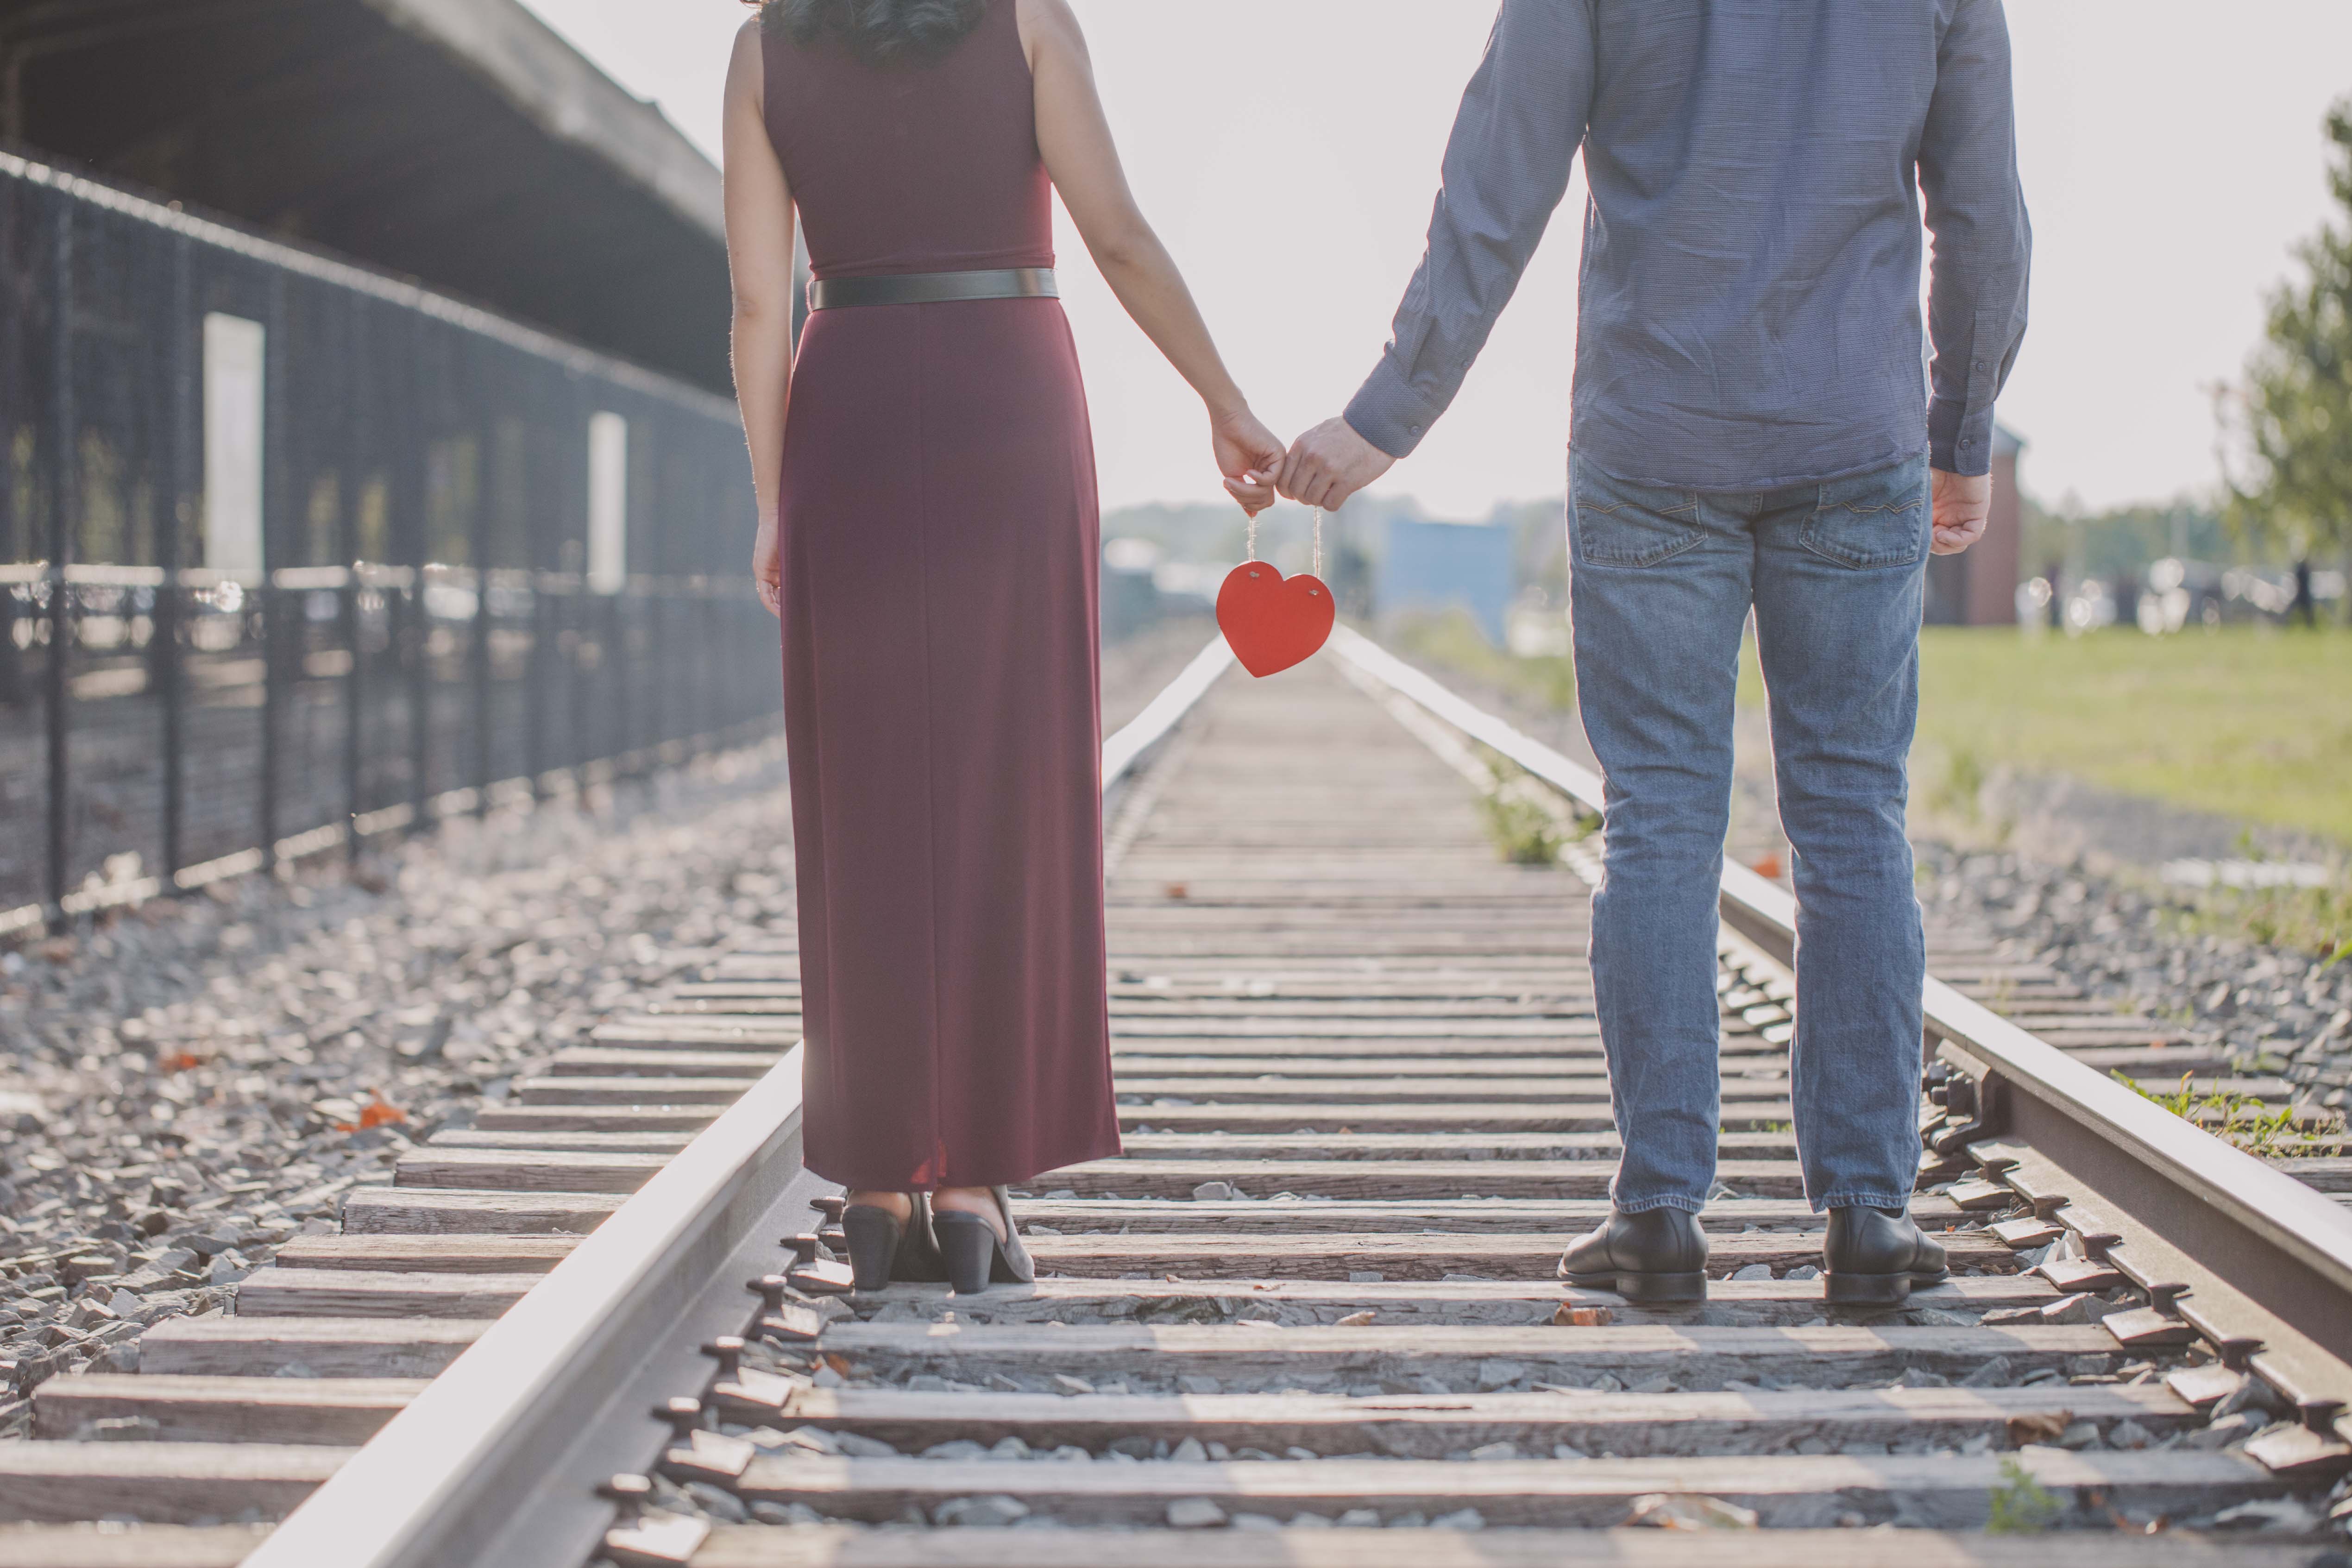 Vintage Train Station Engagement Photos - The SnapKnot Blog